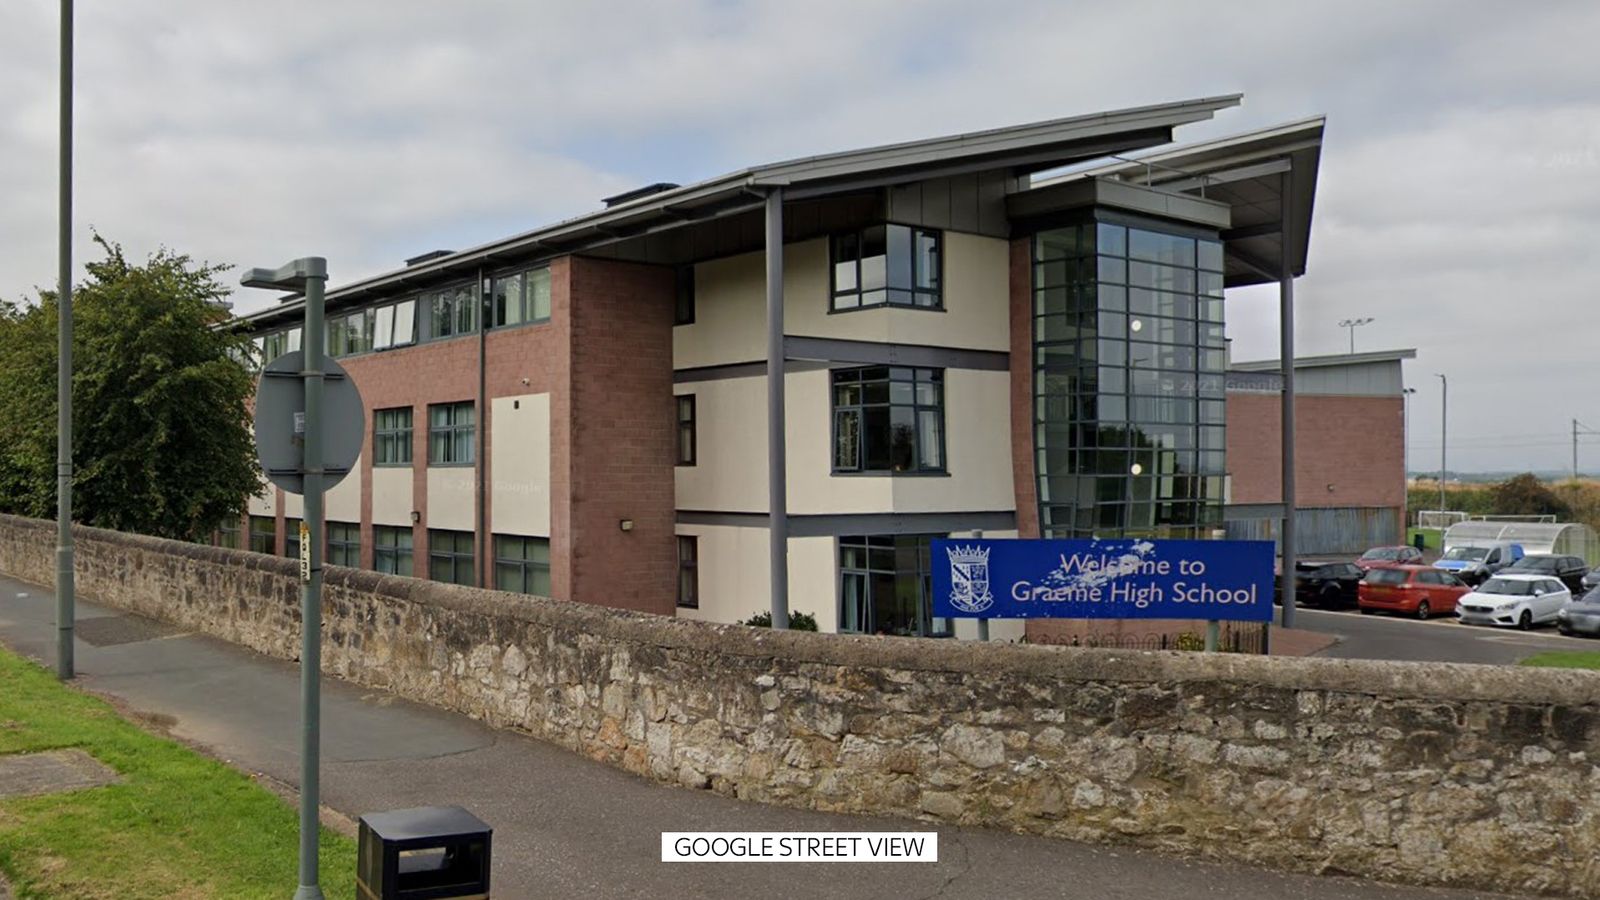 Five children fall ill after smoking 'unknown substance' in vape at Graeme High School in Falkirk